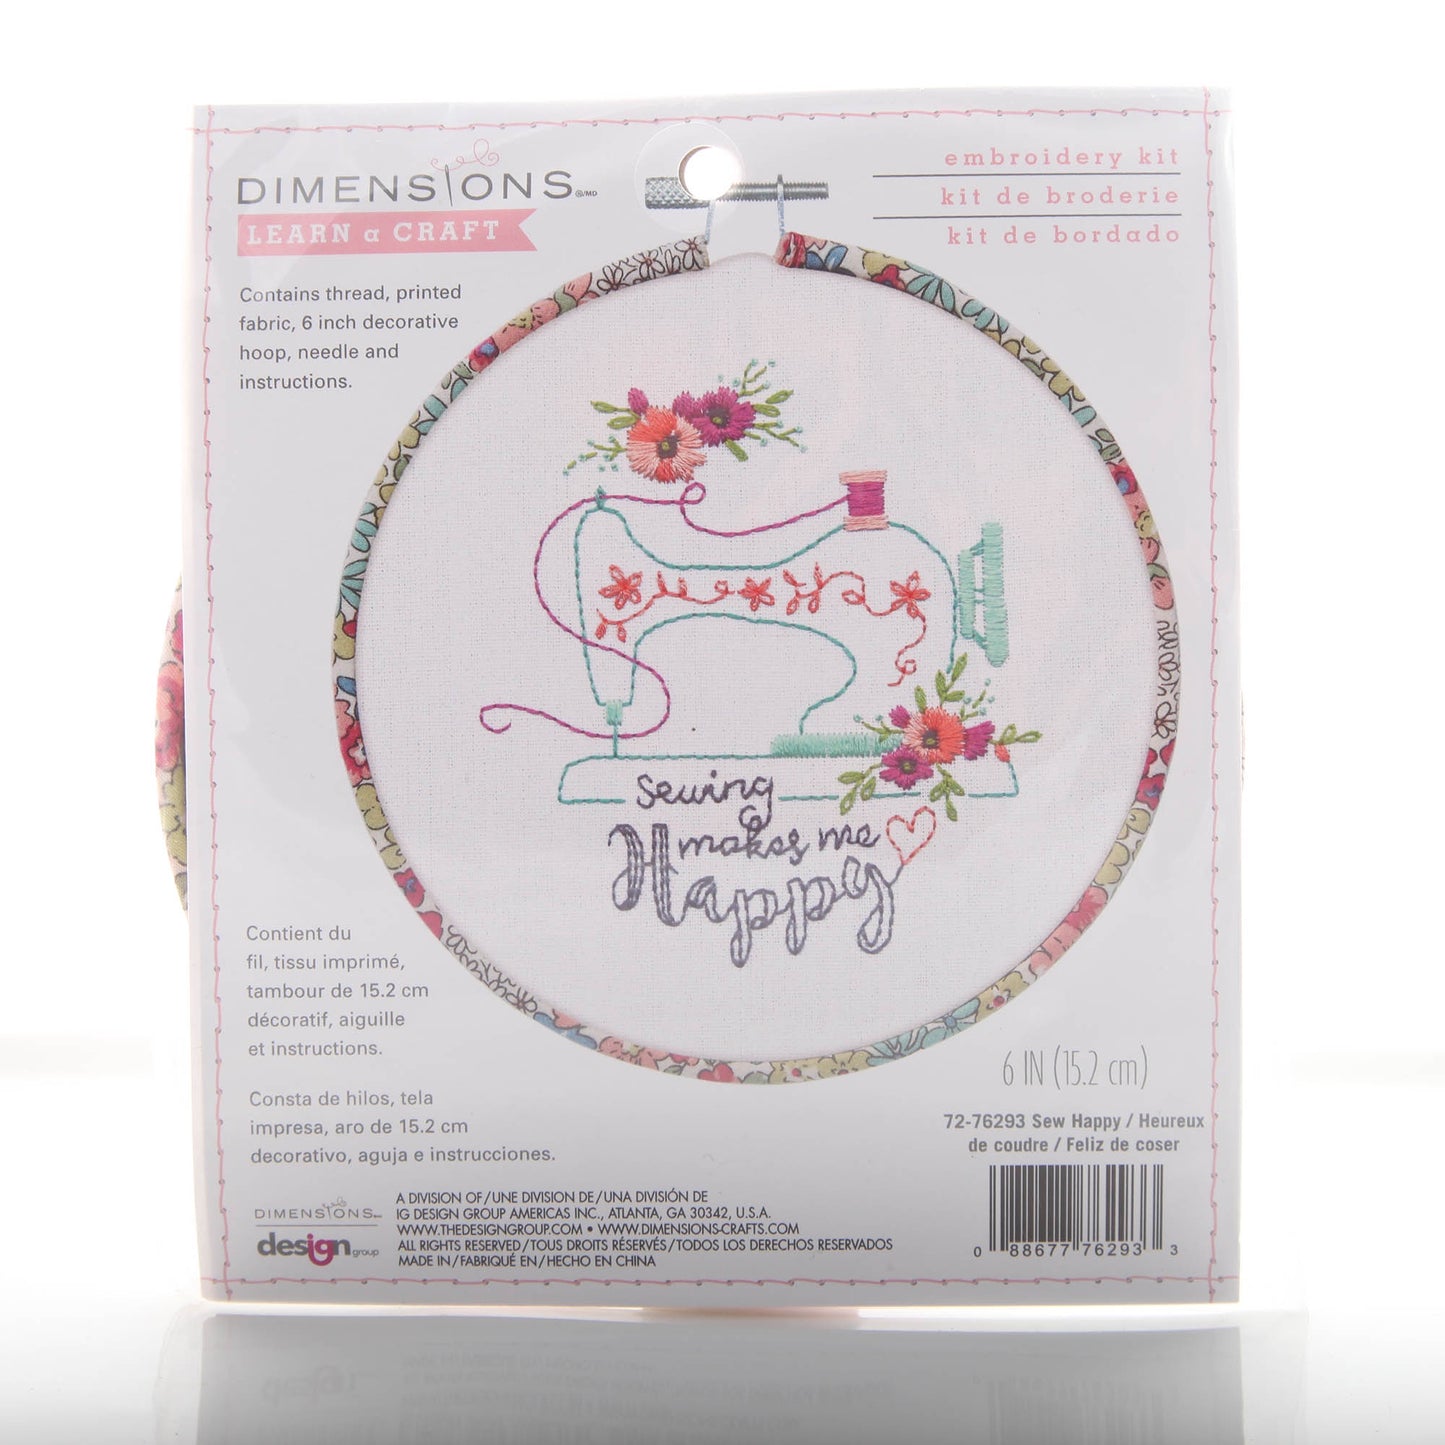 Sewing Makes Me Happy Embroidery Kit